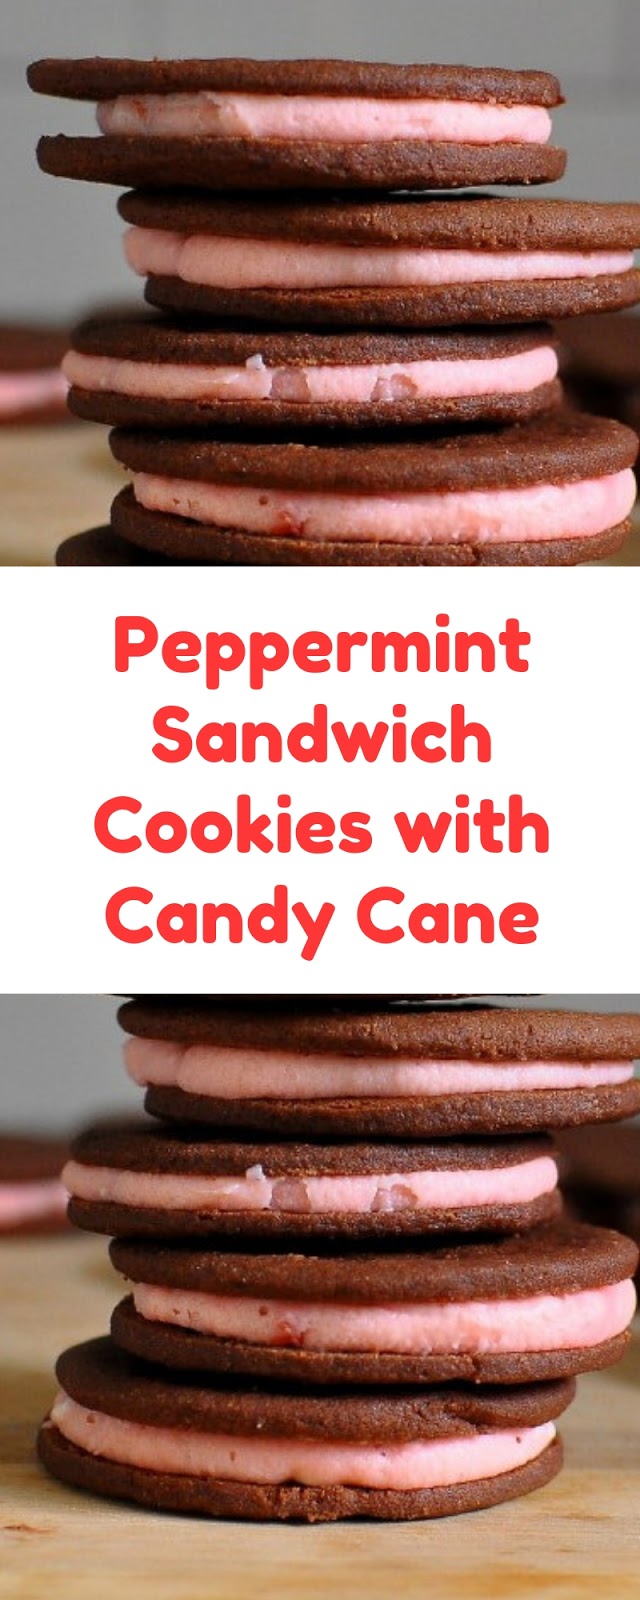 Peppermint Sandwich Cookies with Candy Cane